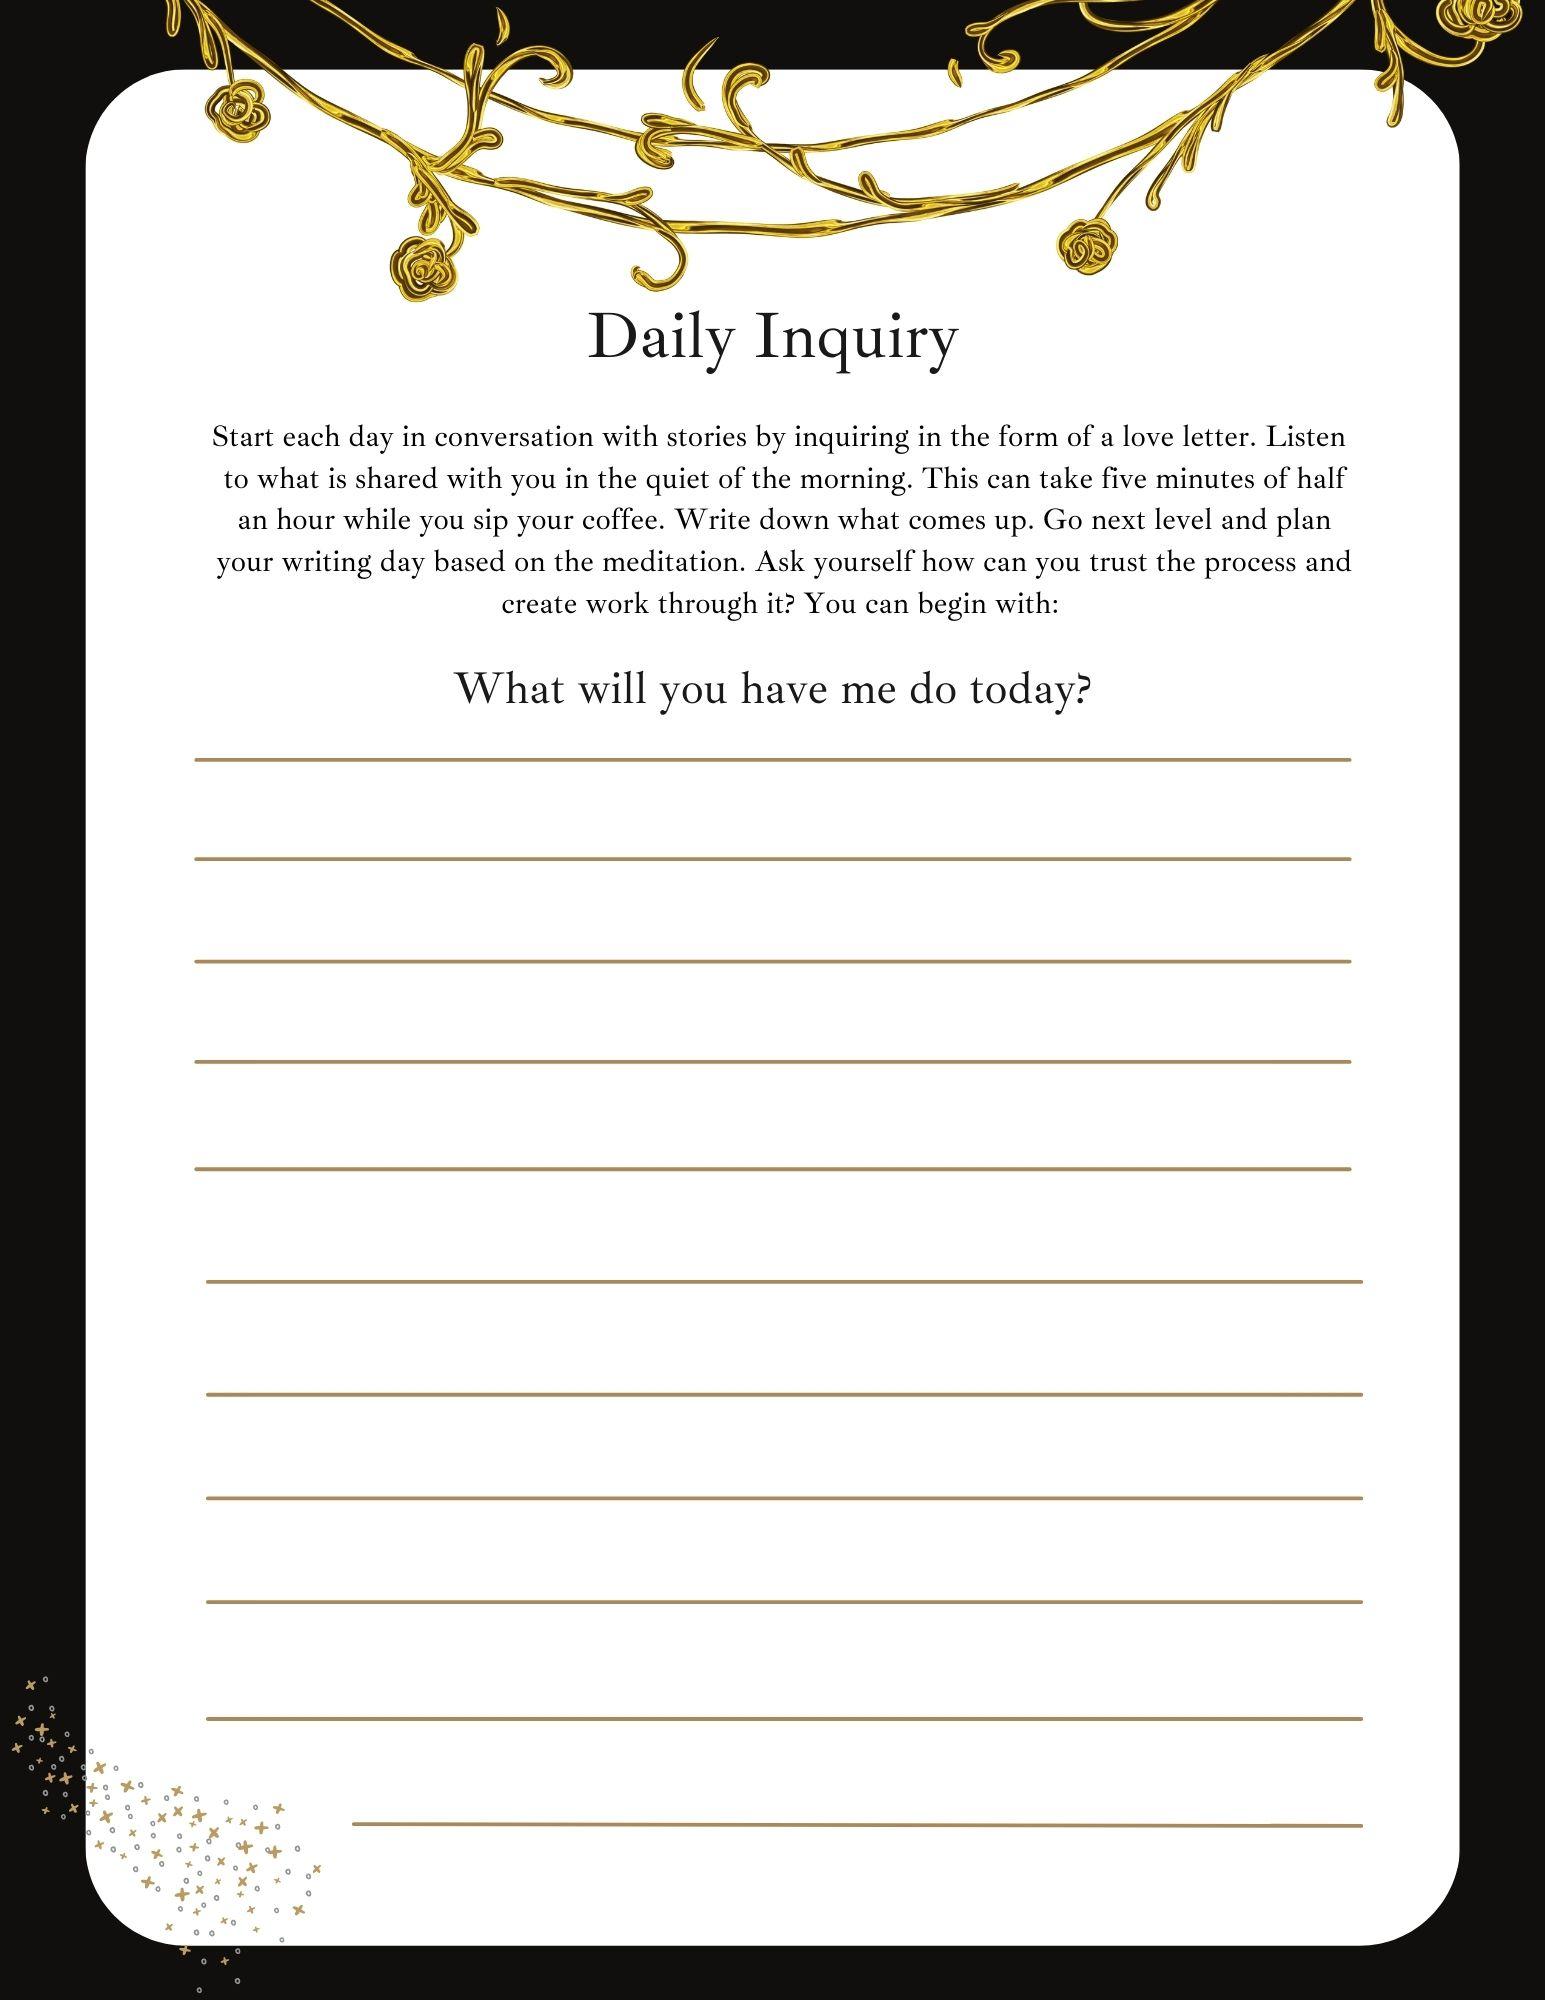 Daily Inquiry Journal Page free download